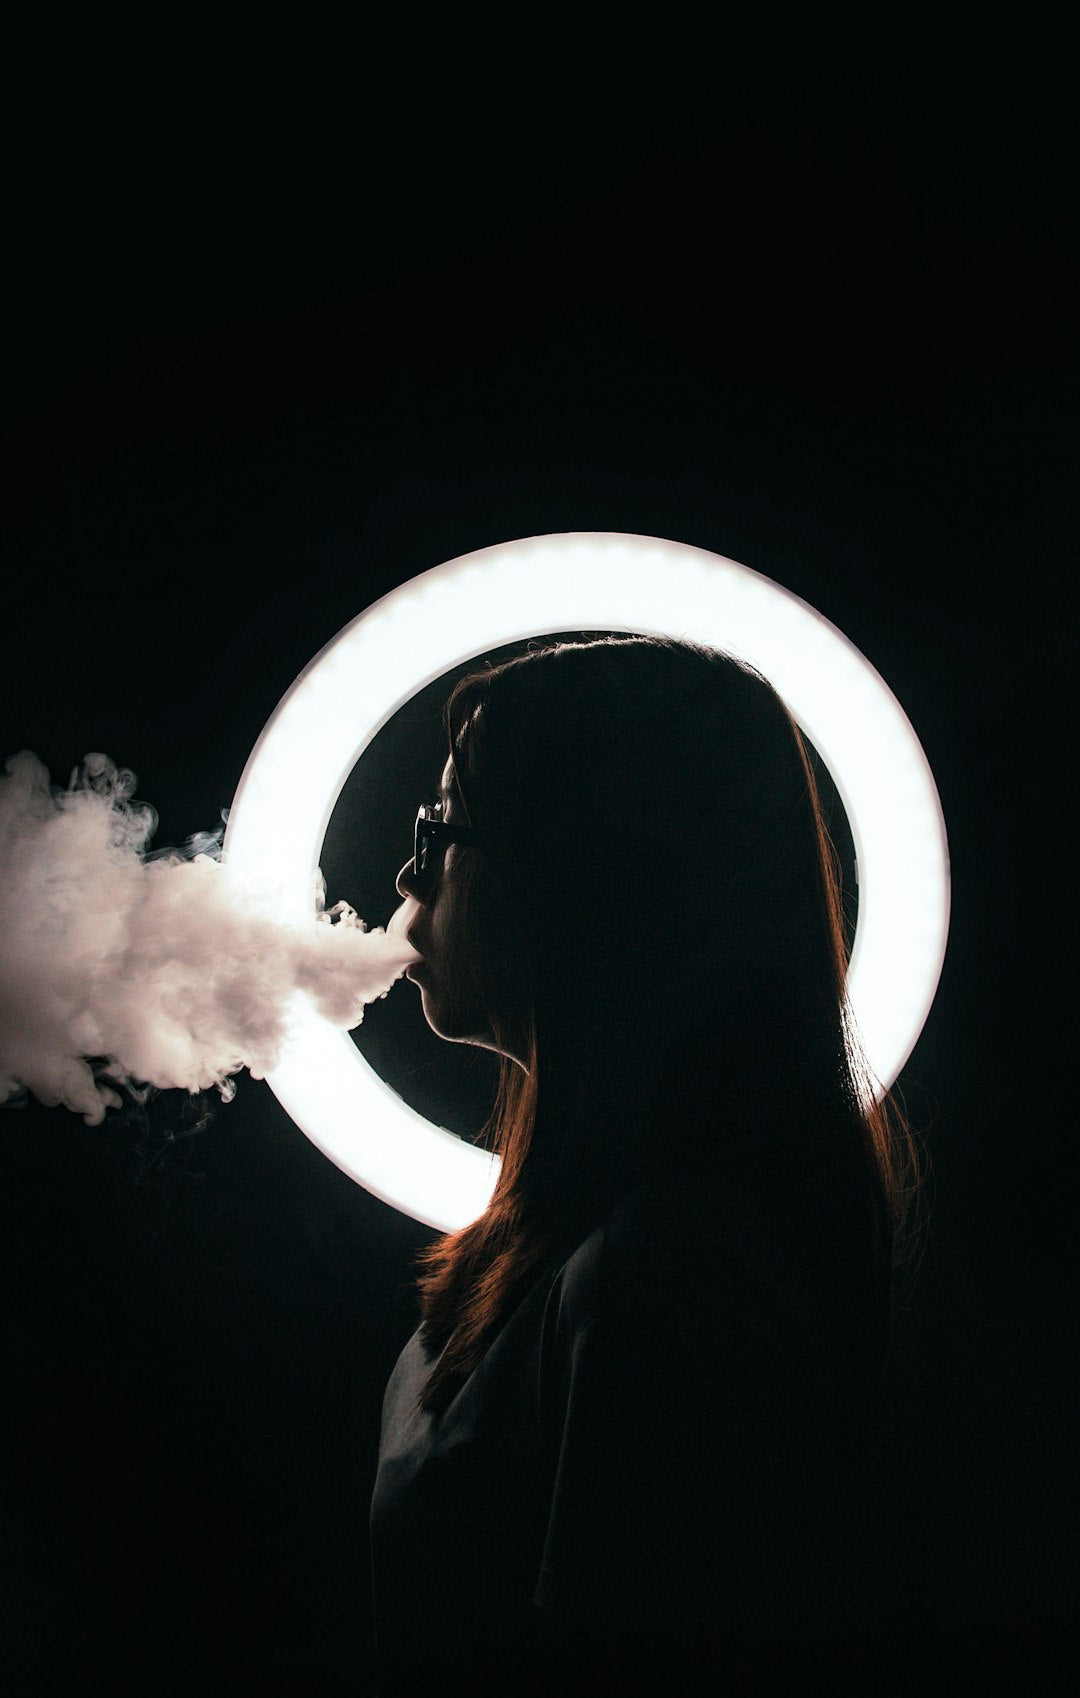 Vaping: An Effective Tool for Quitting Smoking